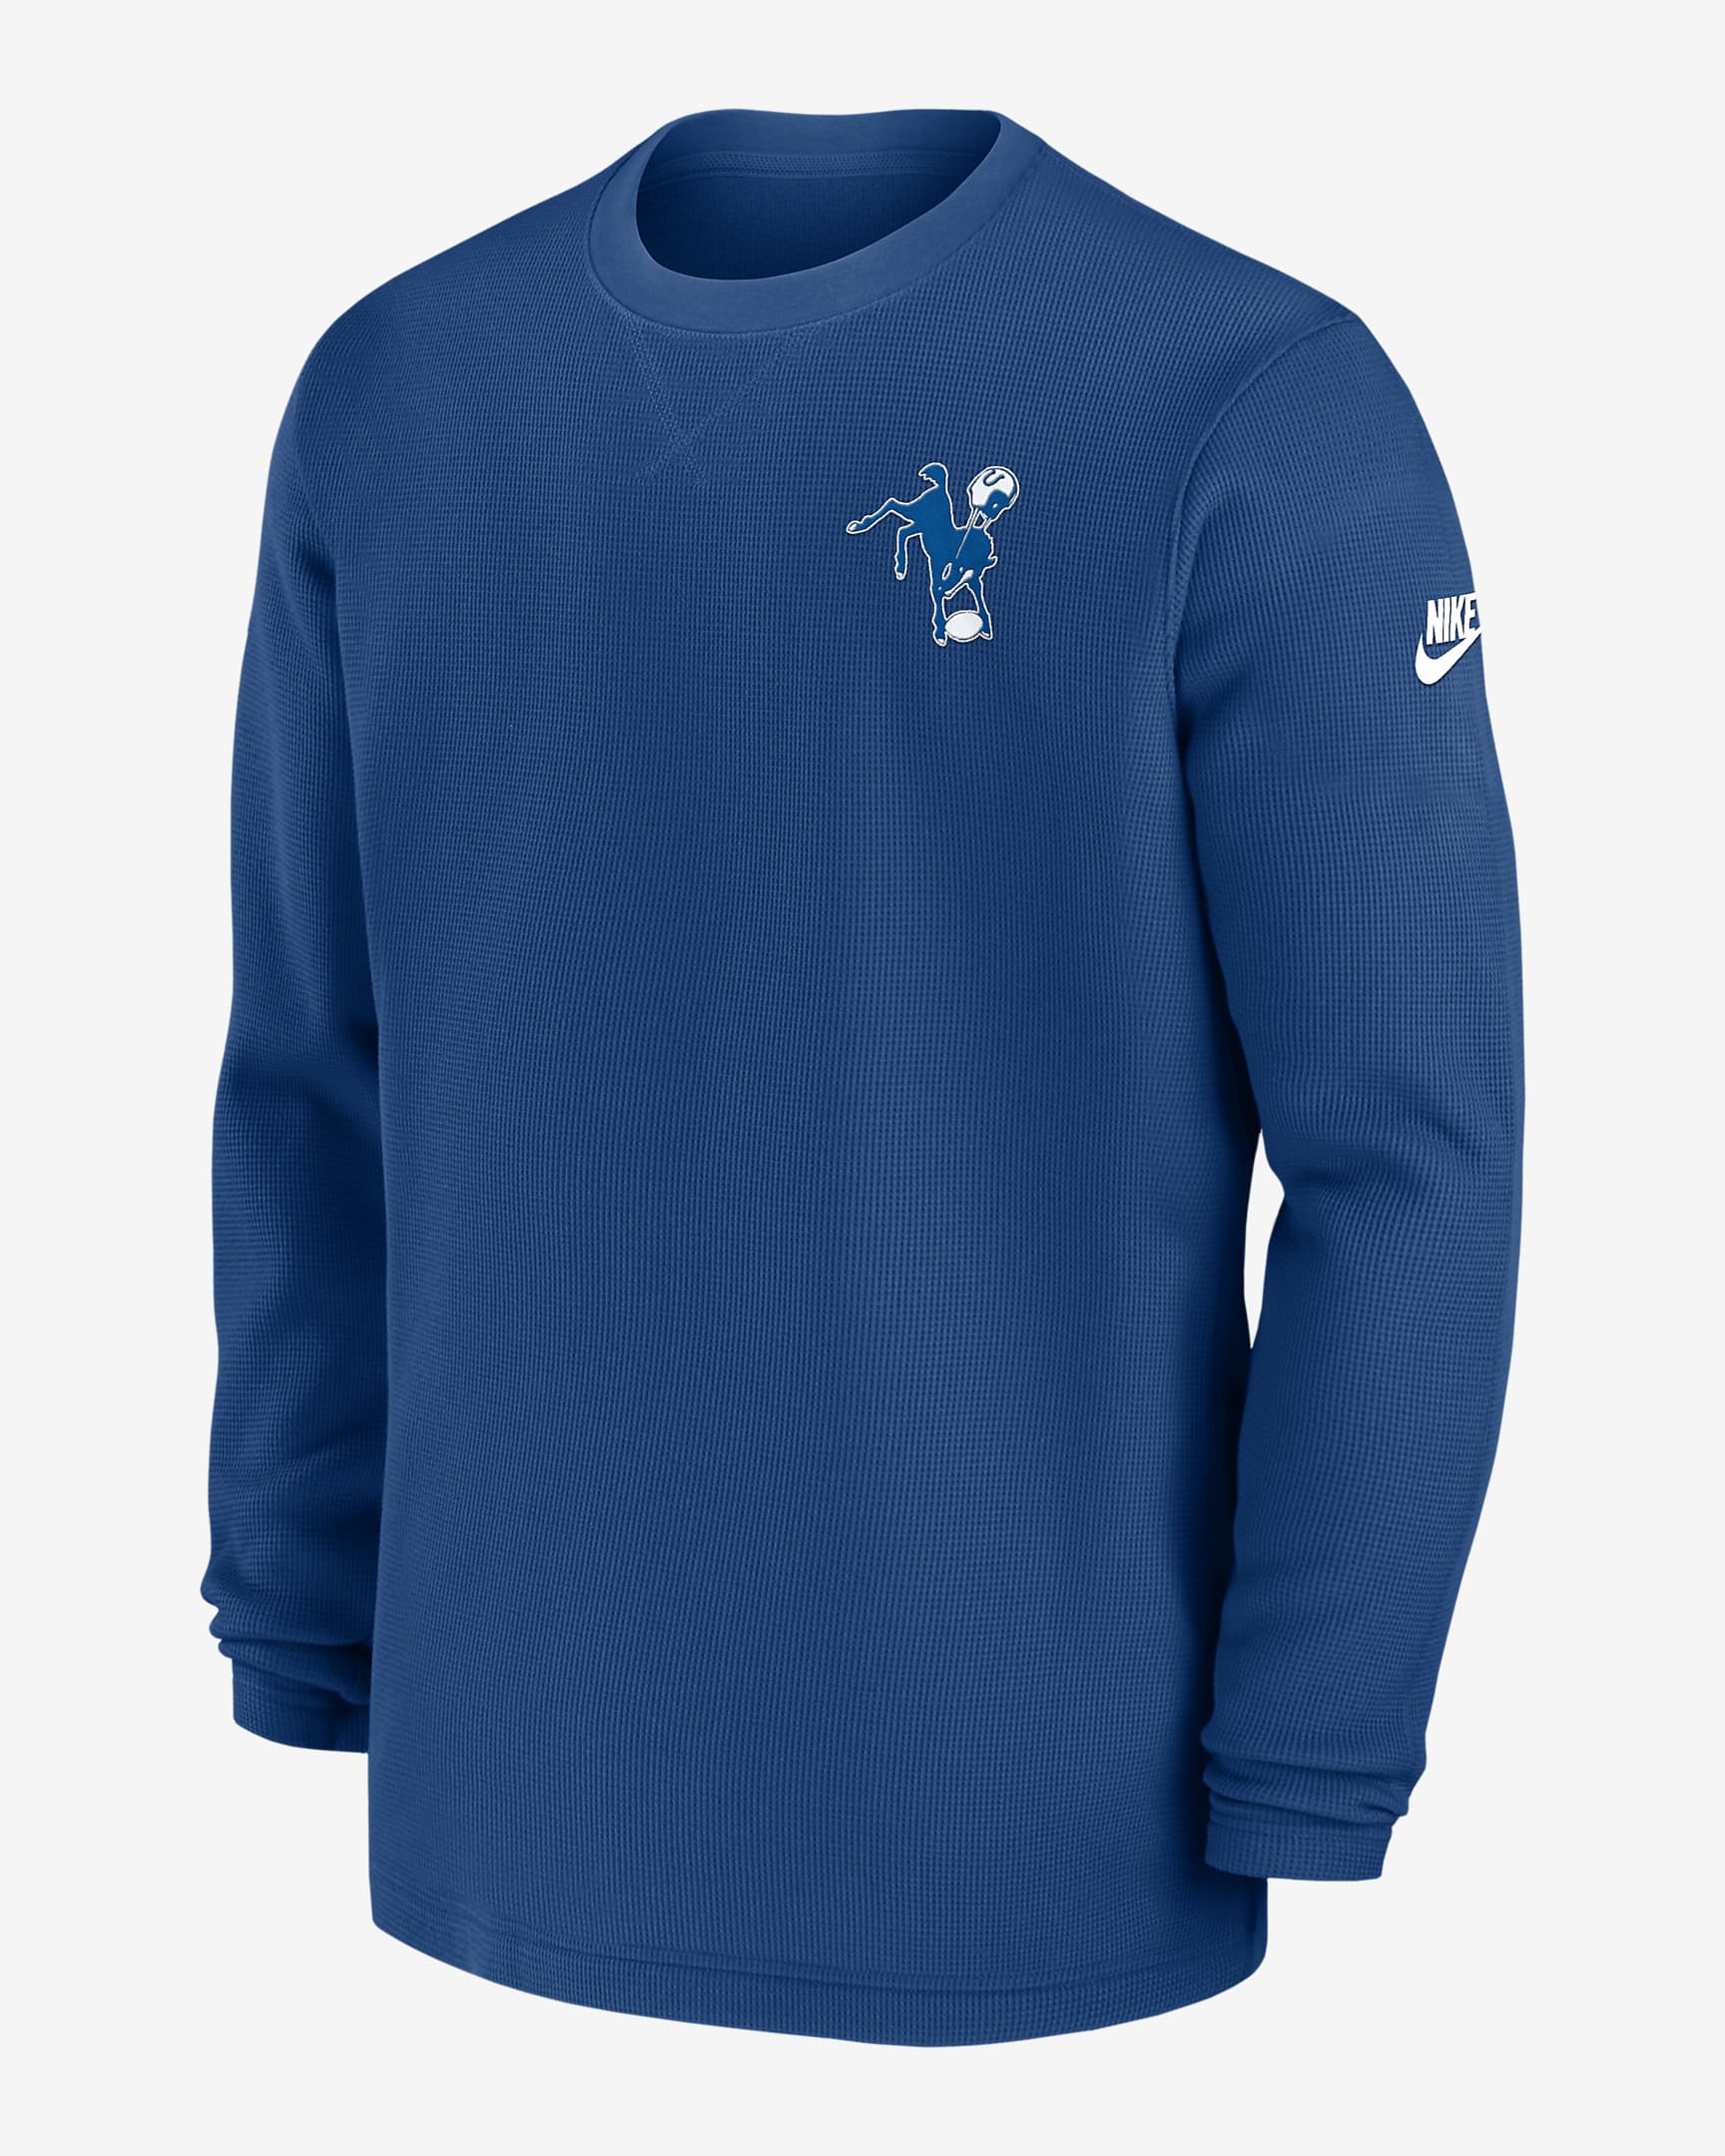 Nike Team (NFL Indianapolis Colts) Men's Pullover Crew. Nike.com